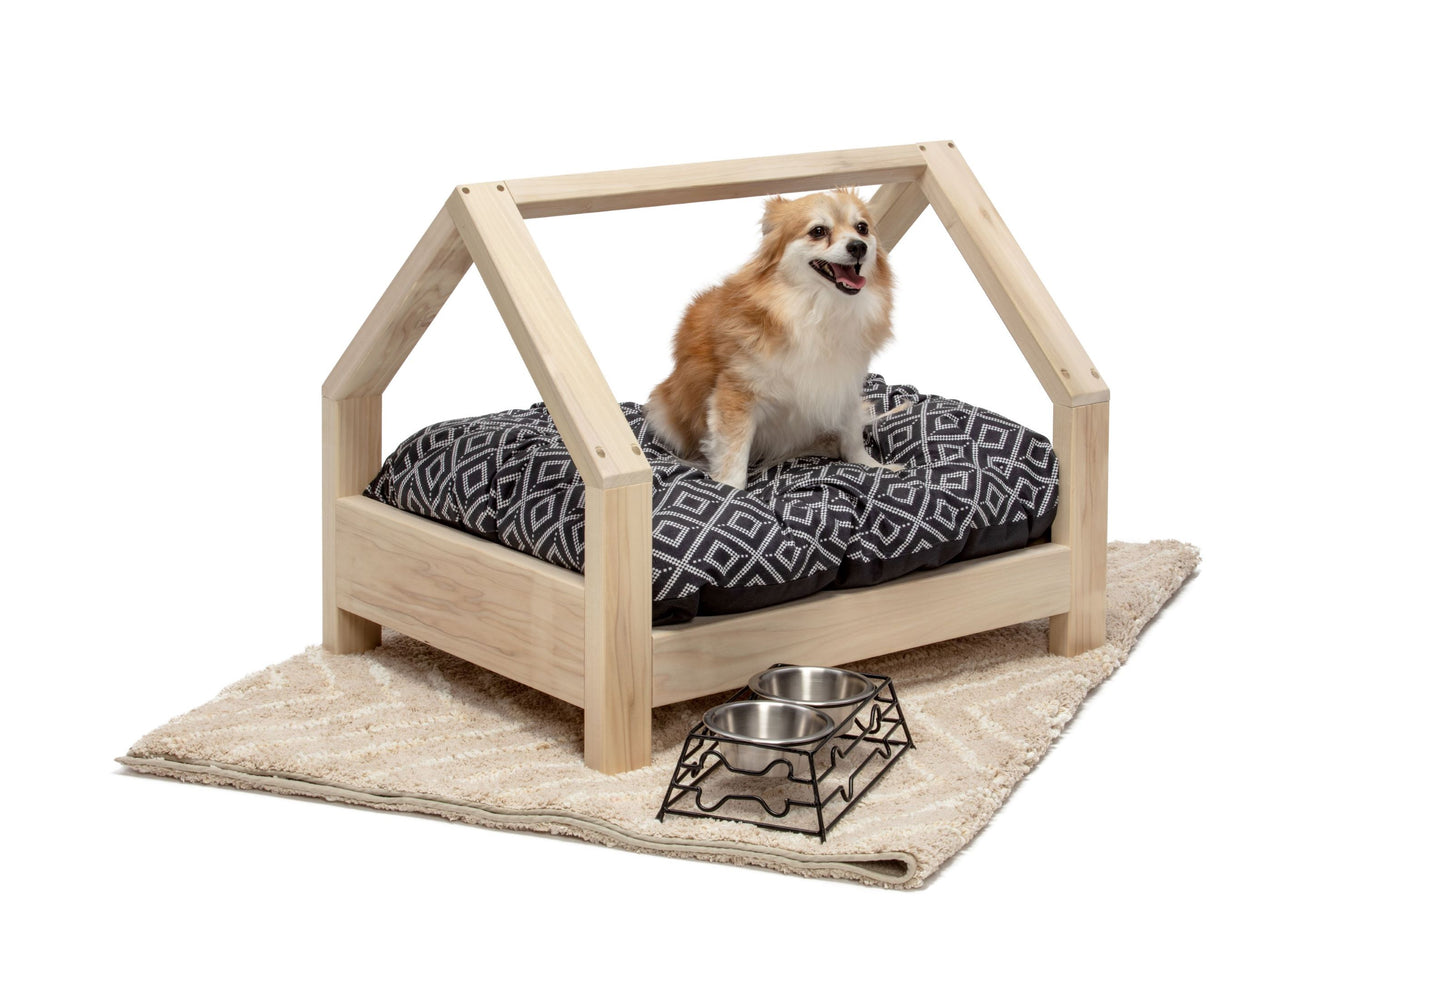 A miniature pet bed crafted entirely from smooth wood, designed for small animals such as cats or small dogs. The bed features a simple yet elegant frame, with rounded corners for comfort and safety. Inside, a soft cushion provides a cozy spot for pets to rest and relax. Placed in a cozy corner of the room with a small blanket nearby, this wooden pet bed offers a stylish and comfortable retreat for furry companions to curl up in.